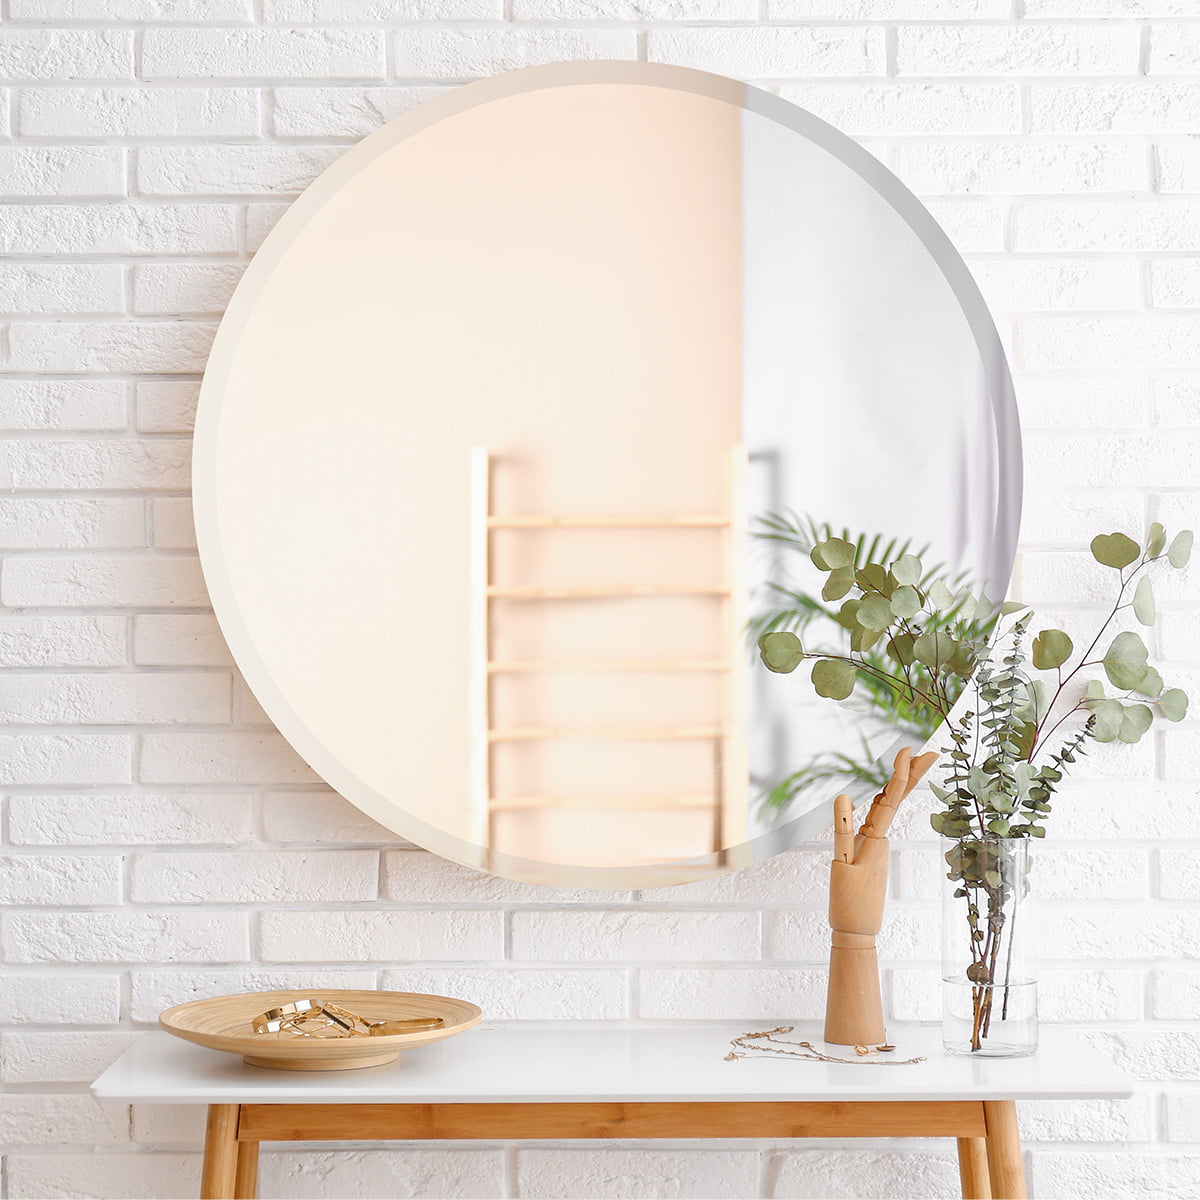 Anyhi Round Mirror 22 inch Black Circle Mirror for Entryways, Washrooms, Living Rooms, Size: B-22